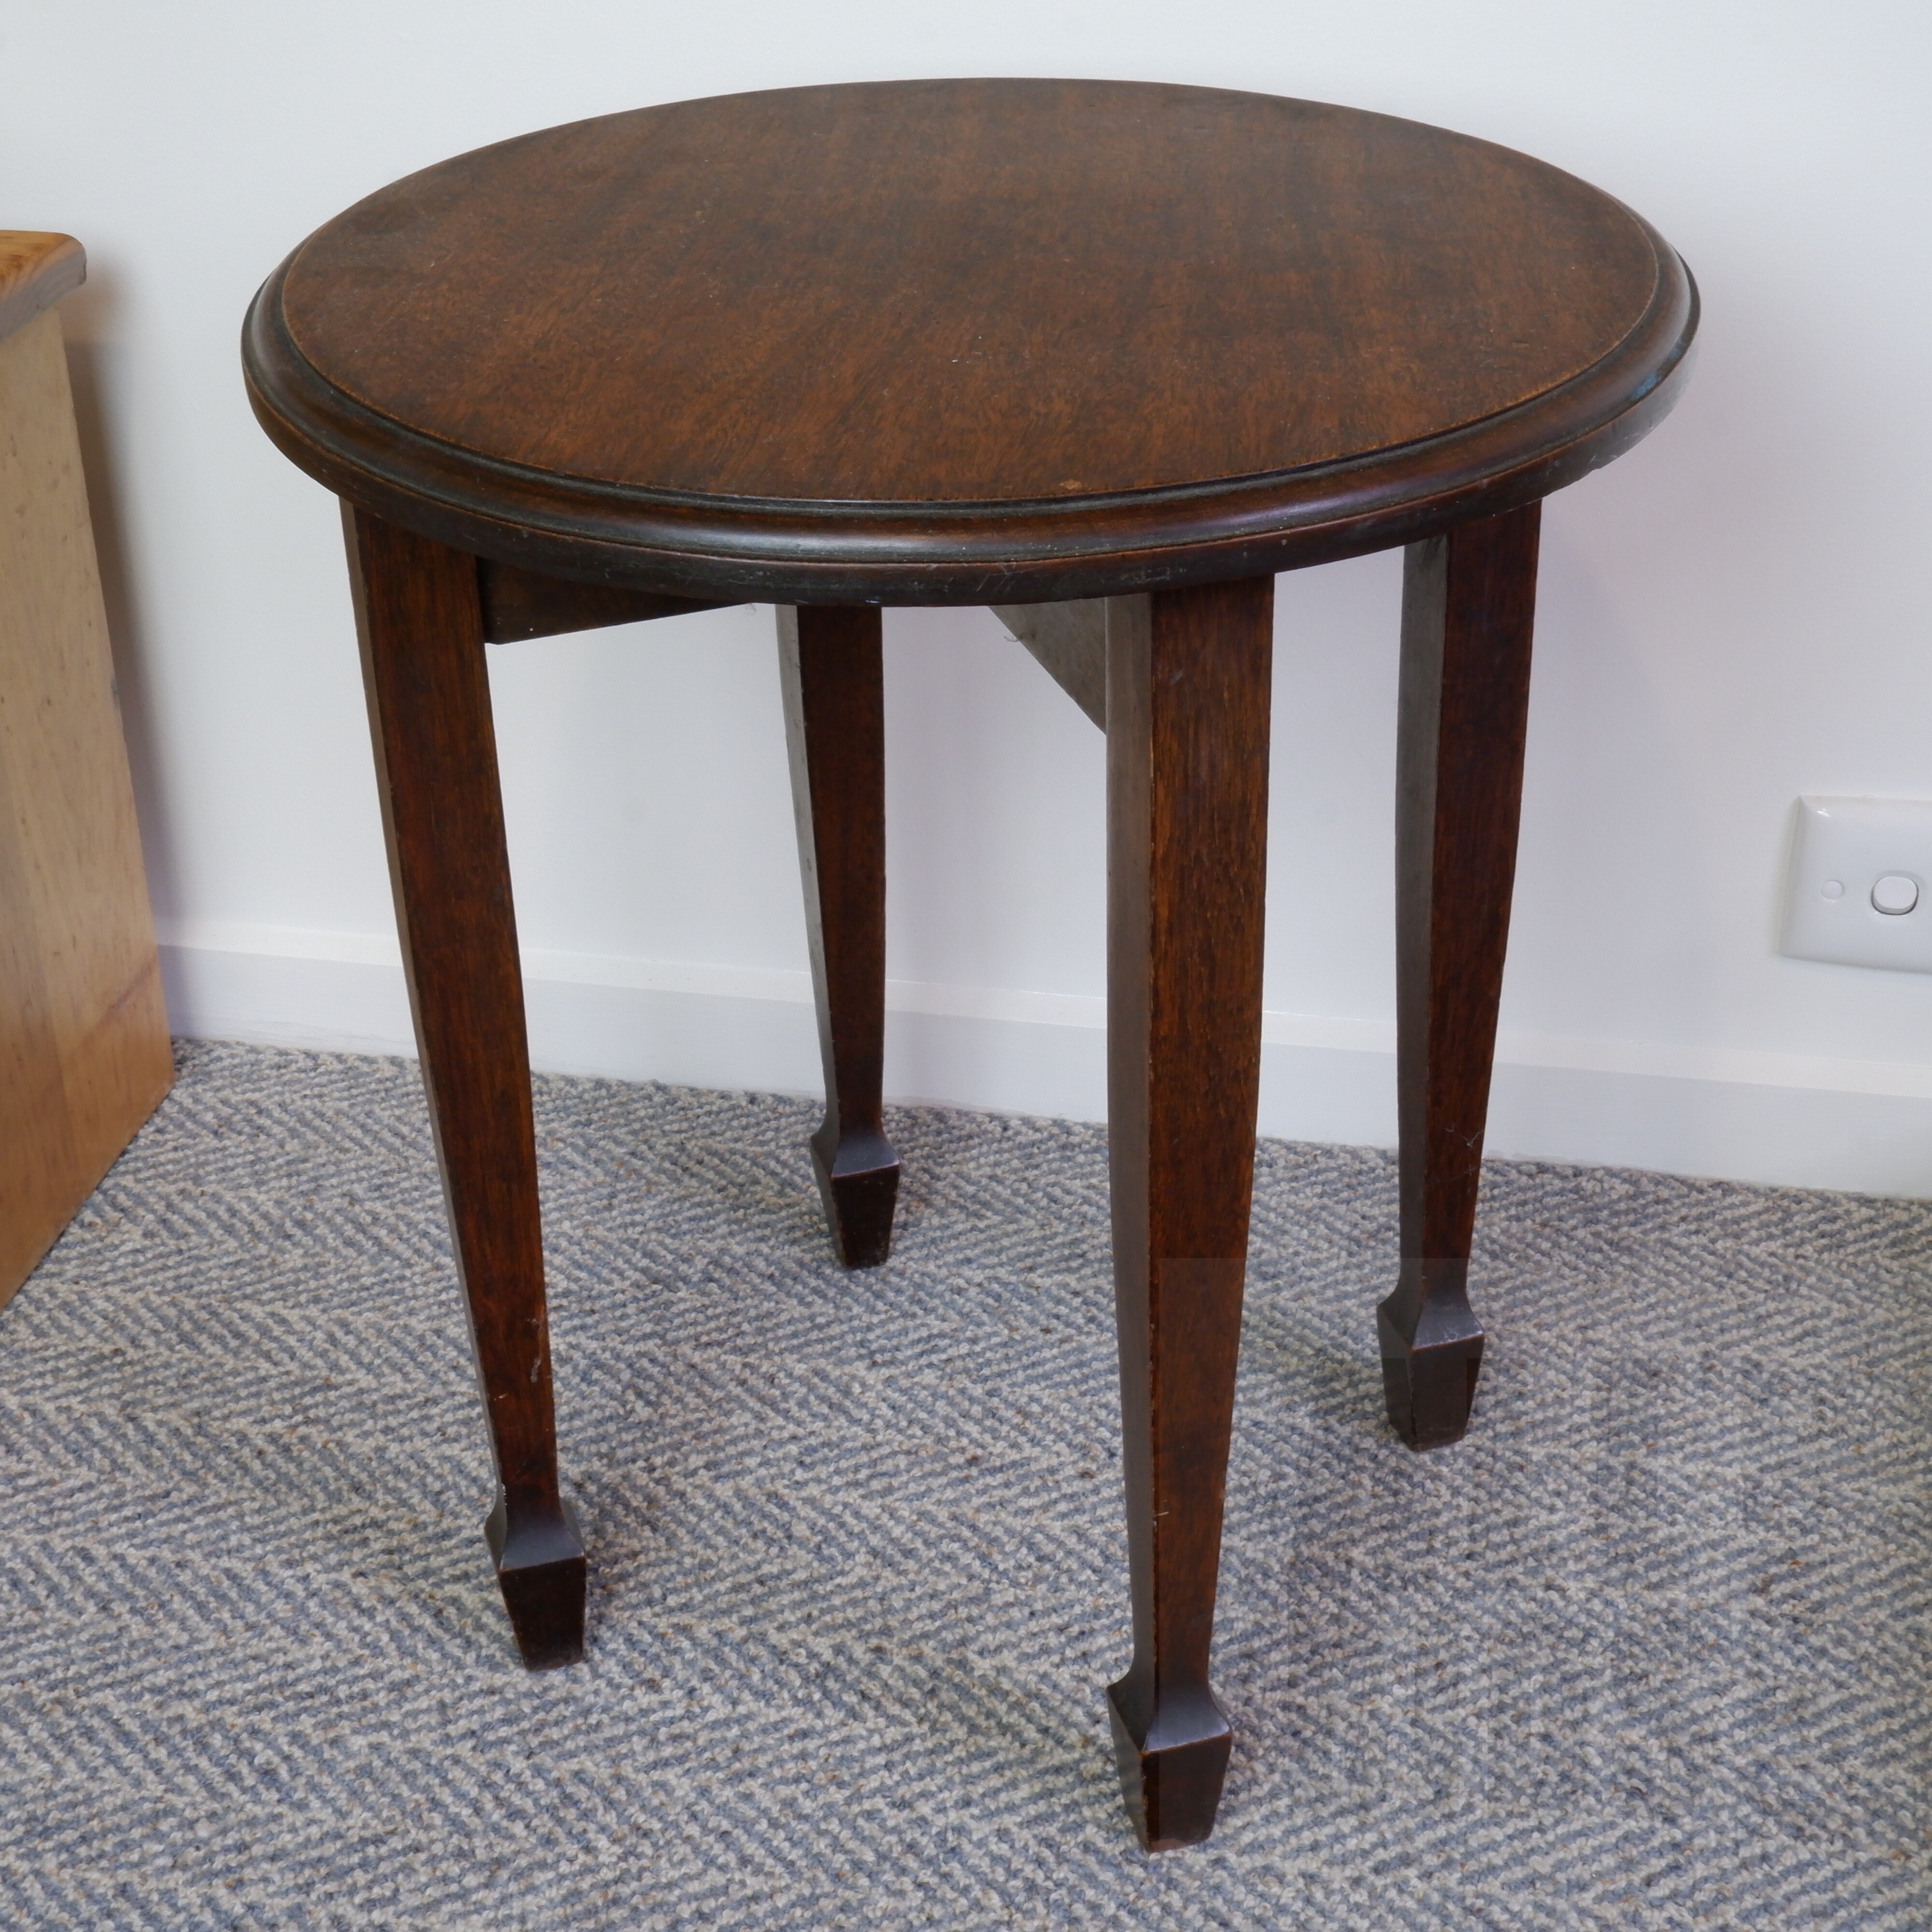 'Antique Oak Side Table with Tapered Legs, Circa 1920s'